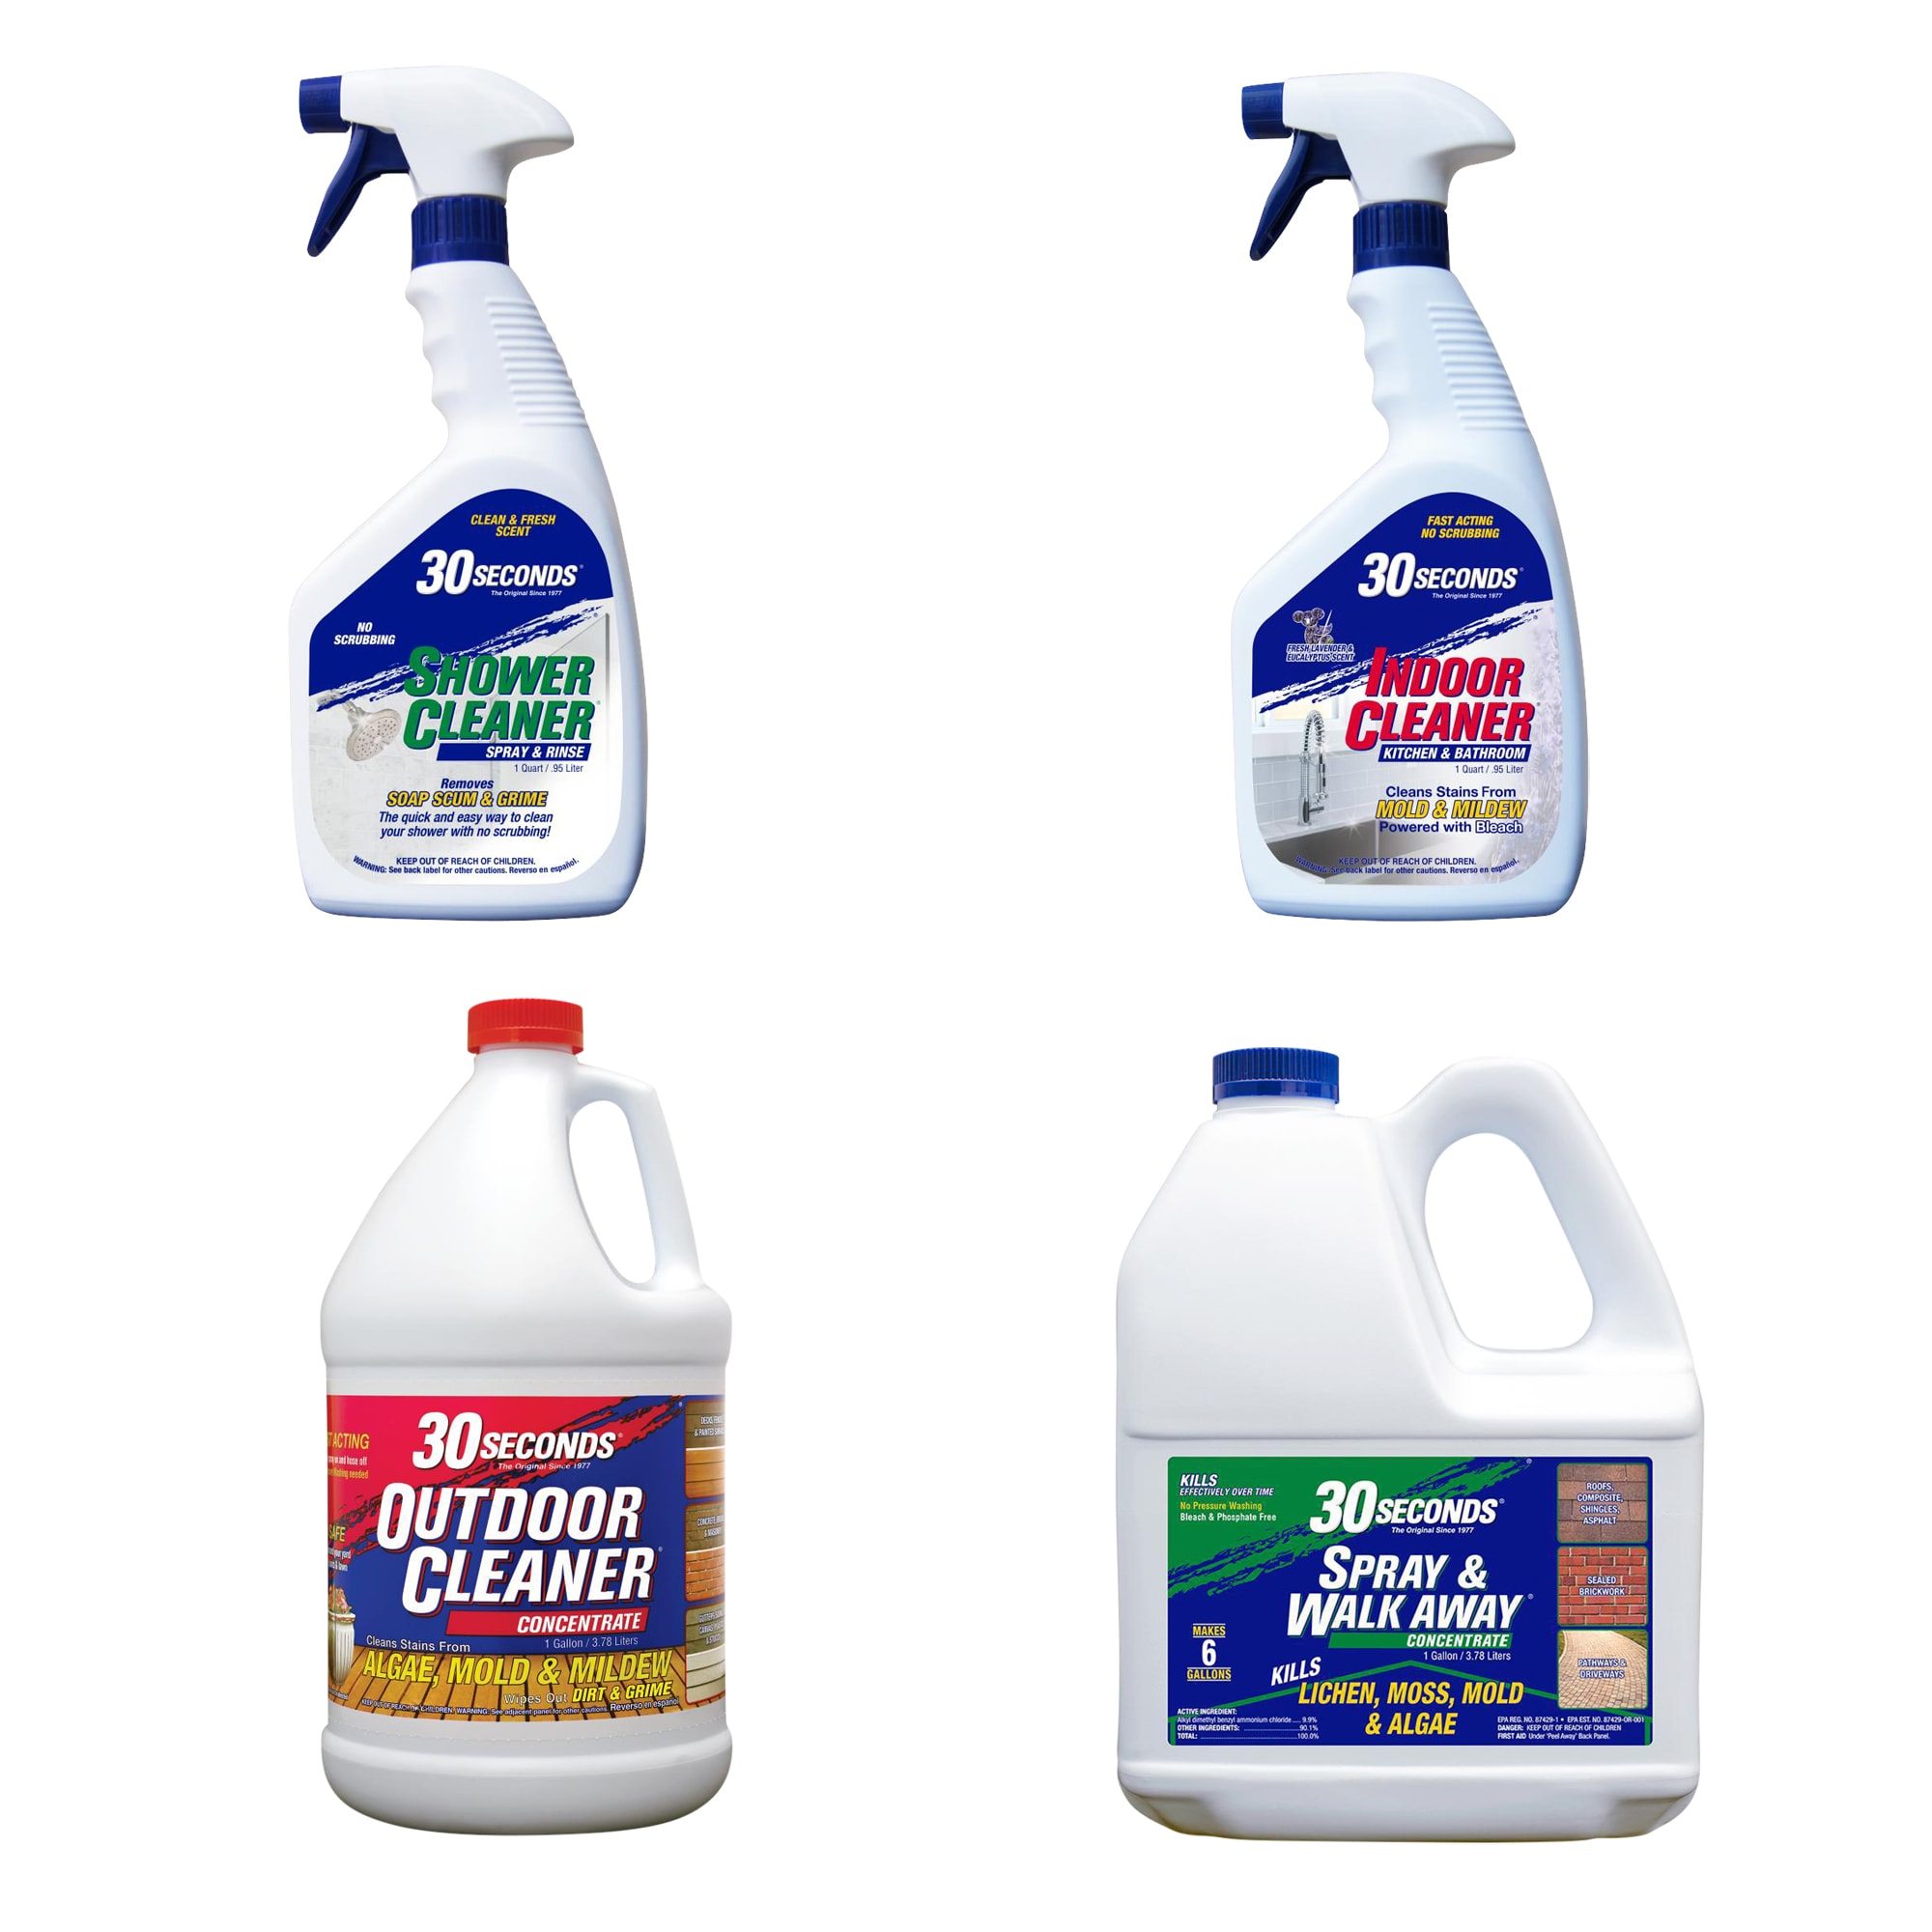 30 SECONDS Outdoor Cleaner for Stains from Algae, Mold and Mildew 1 Gallon